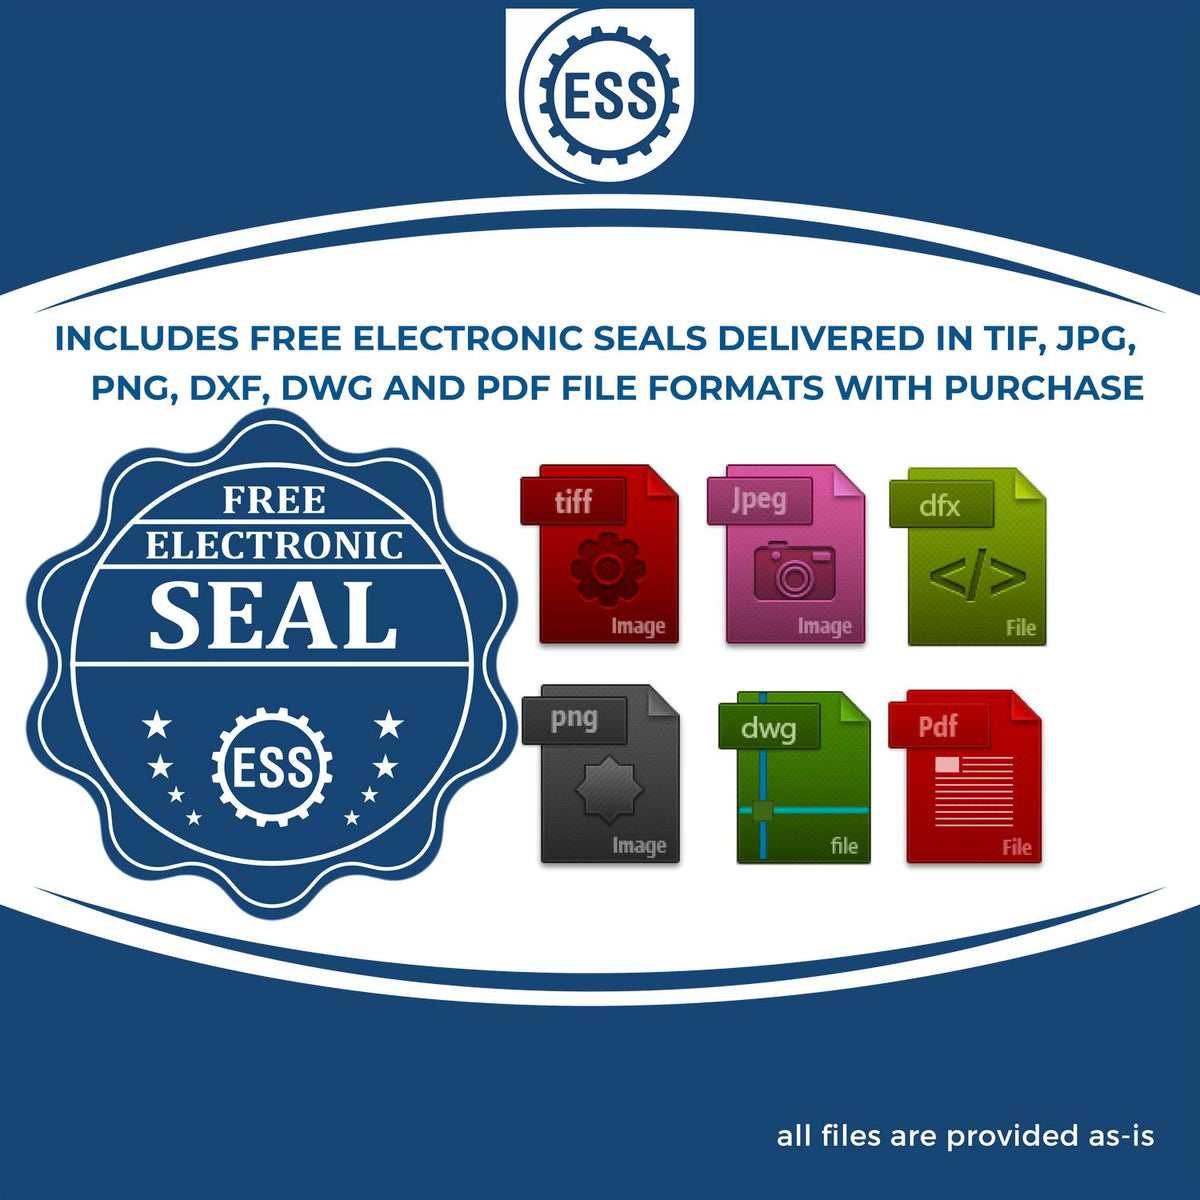 An infographic for the free electronic seal for the Long Reach Hawaii Geology Seal illustrating the different file type icons such as DXF, DWG, TIF, JPG and PNG.